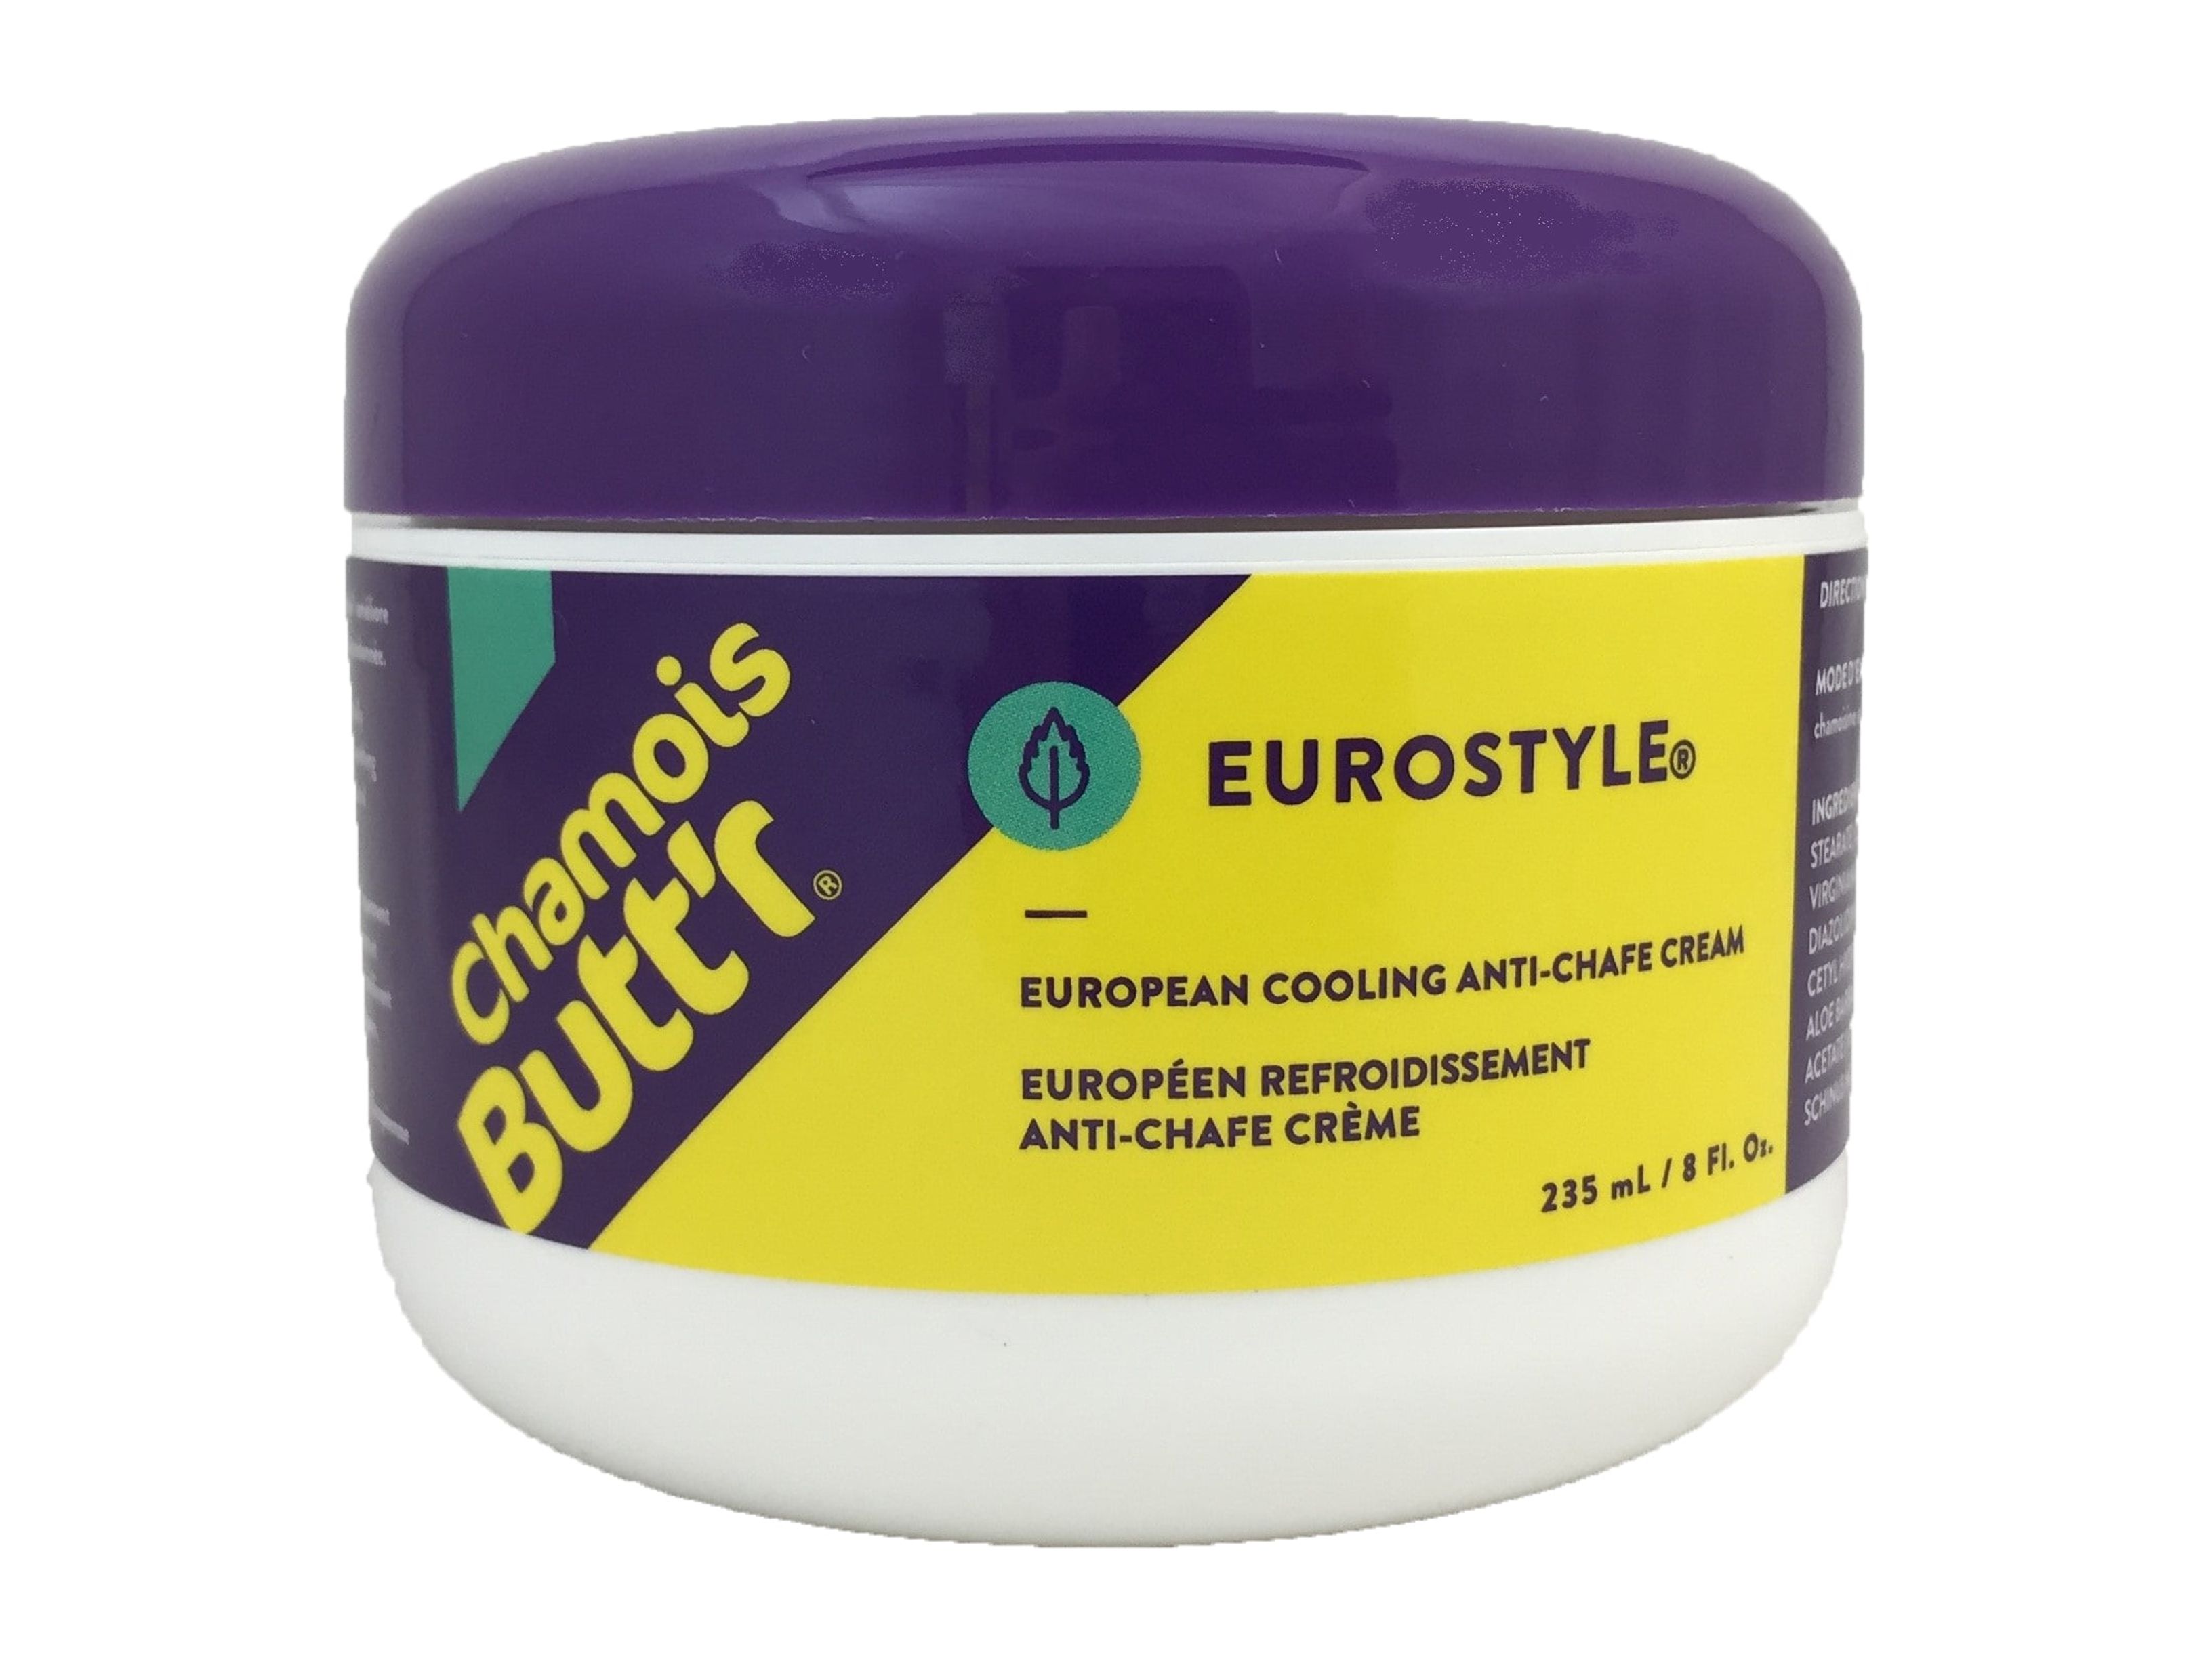 Chamois Buttr Eurostyle Anti Chafe Cream Non-Greasy Lubricant 8 Ounce Jar - image 1 of 7